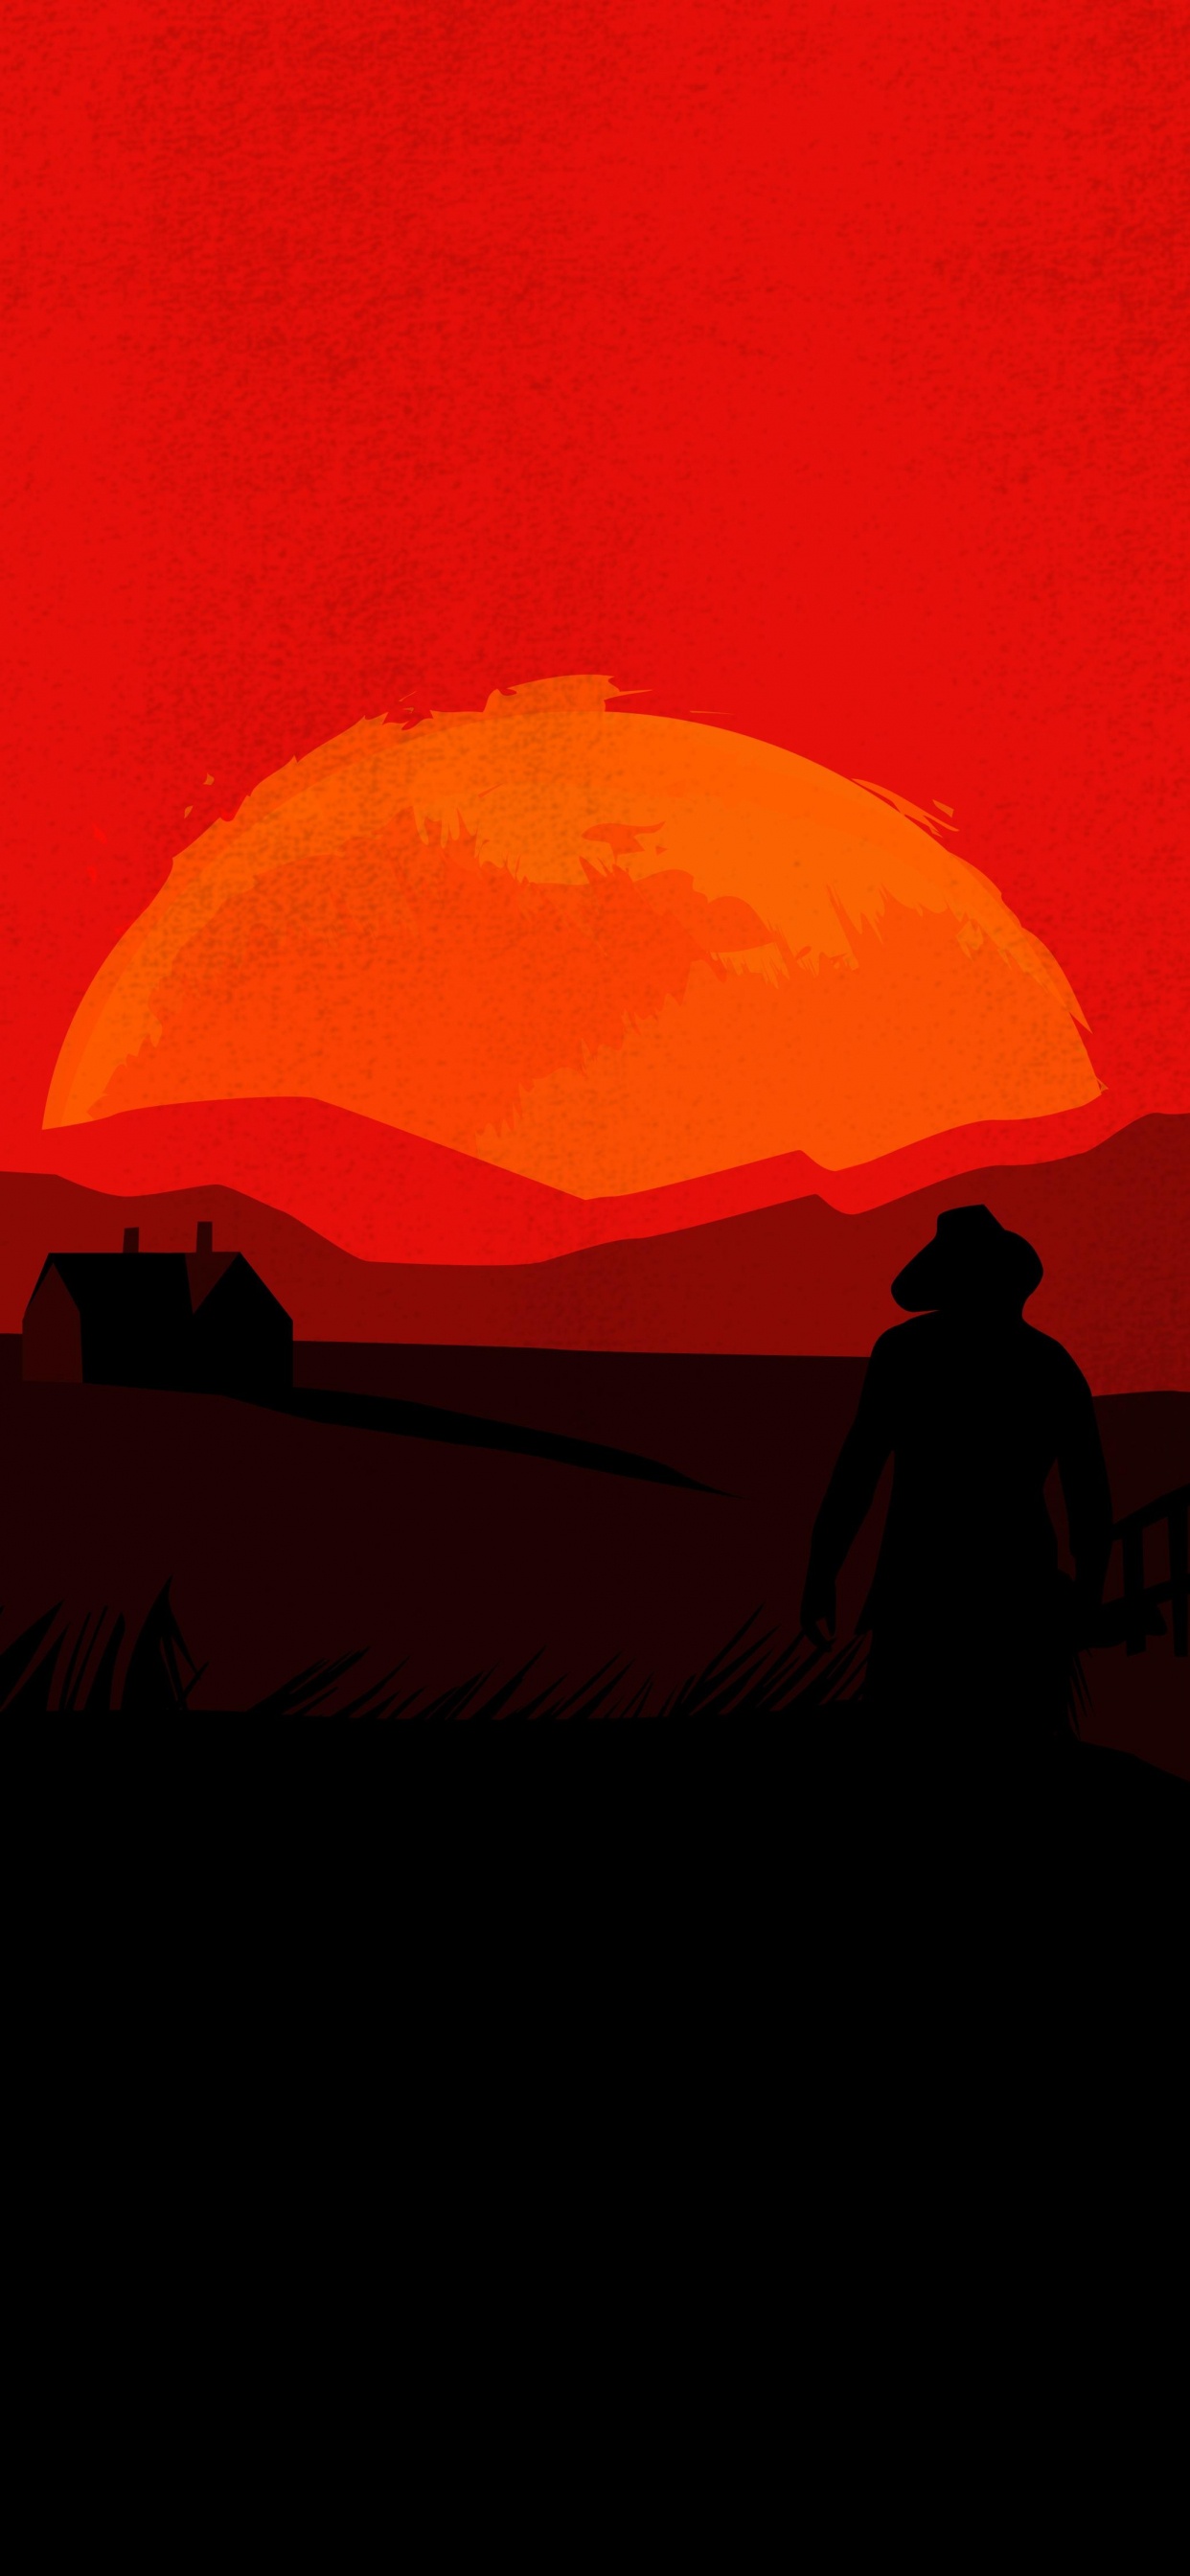 Red Dead Redemption 2, Red Dead Redemption, Red, Afterglow, Lever. Wallpaper in 1242x2688 Resolution